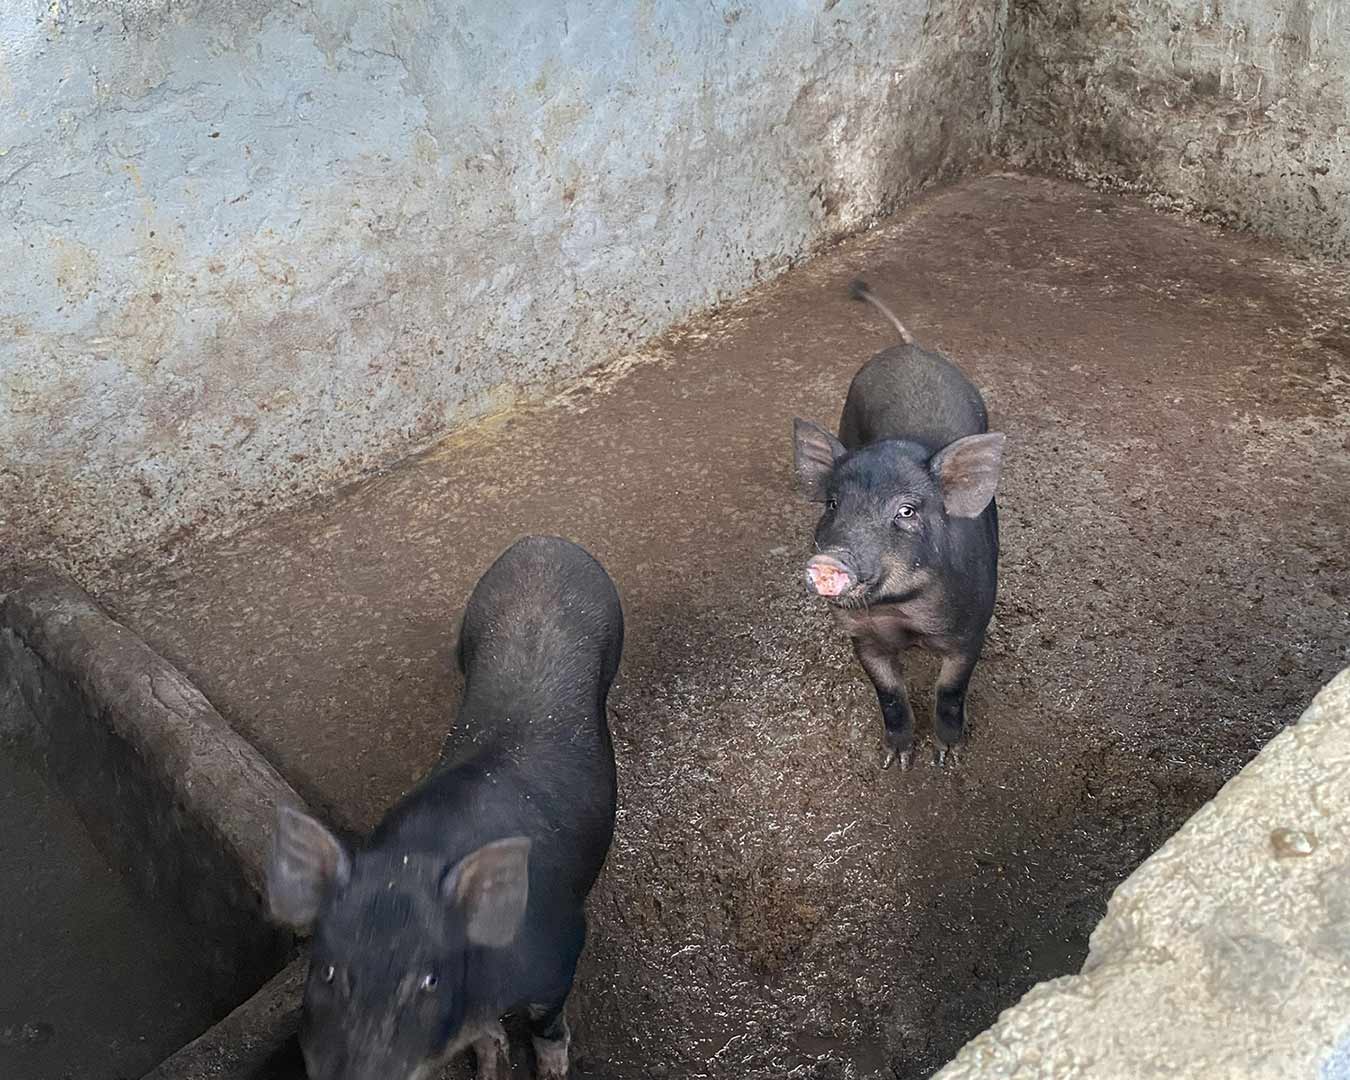 Two pigs in a cement pigsty